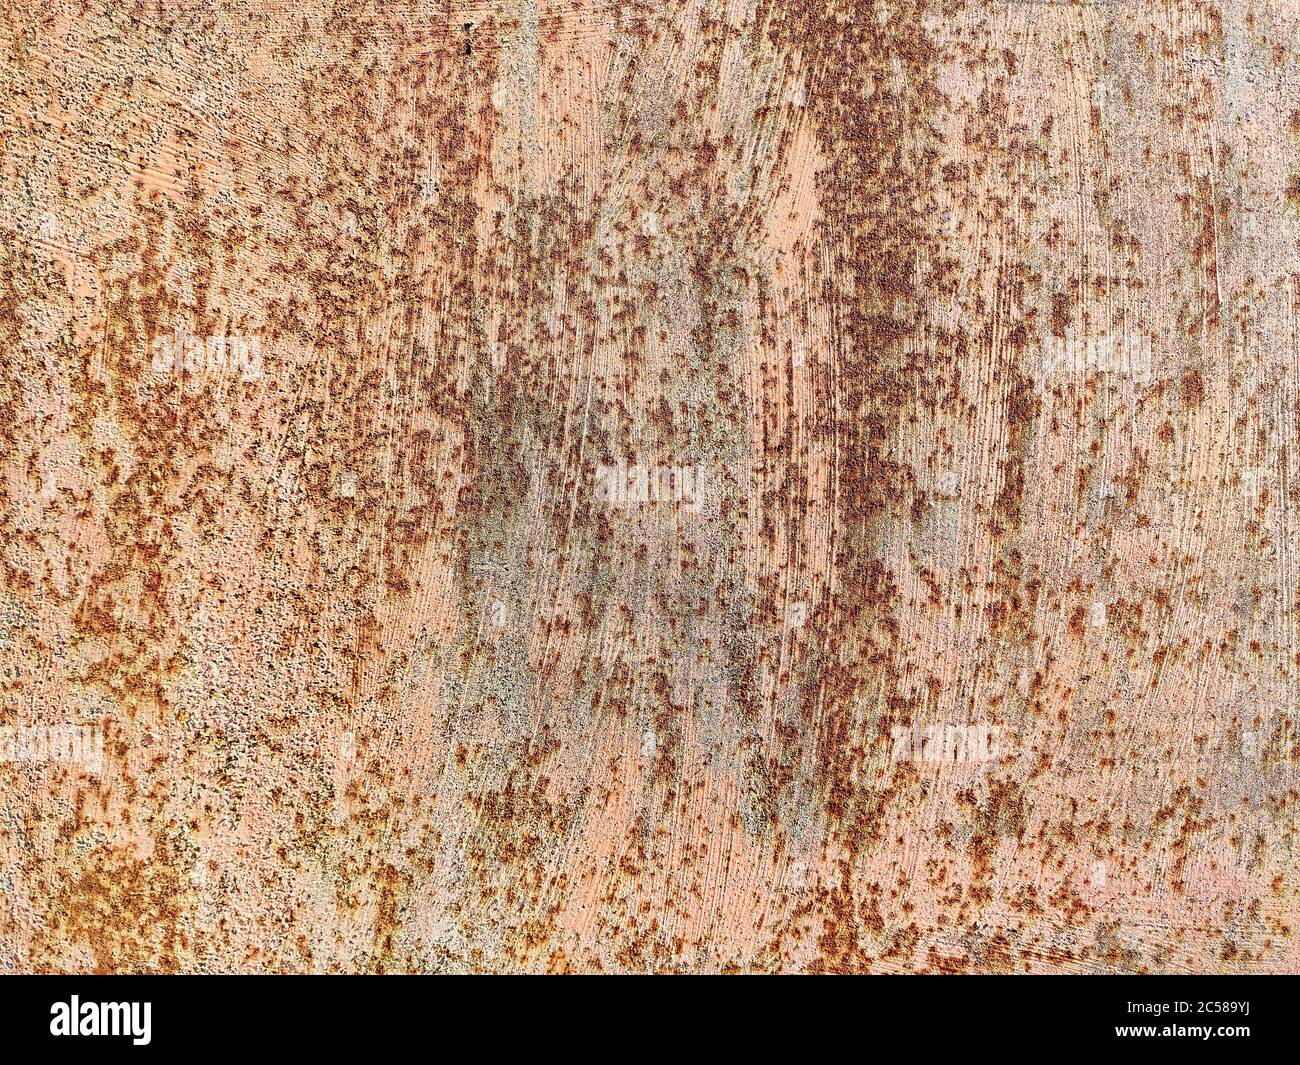 Rusty metal panel with cracked paint, corroded grunge metal background texture Stock Photo